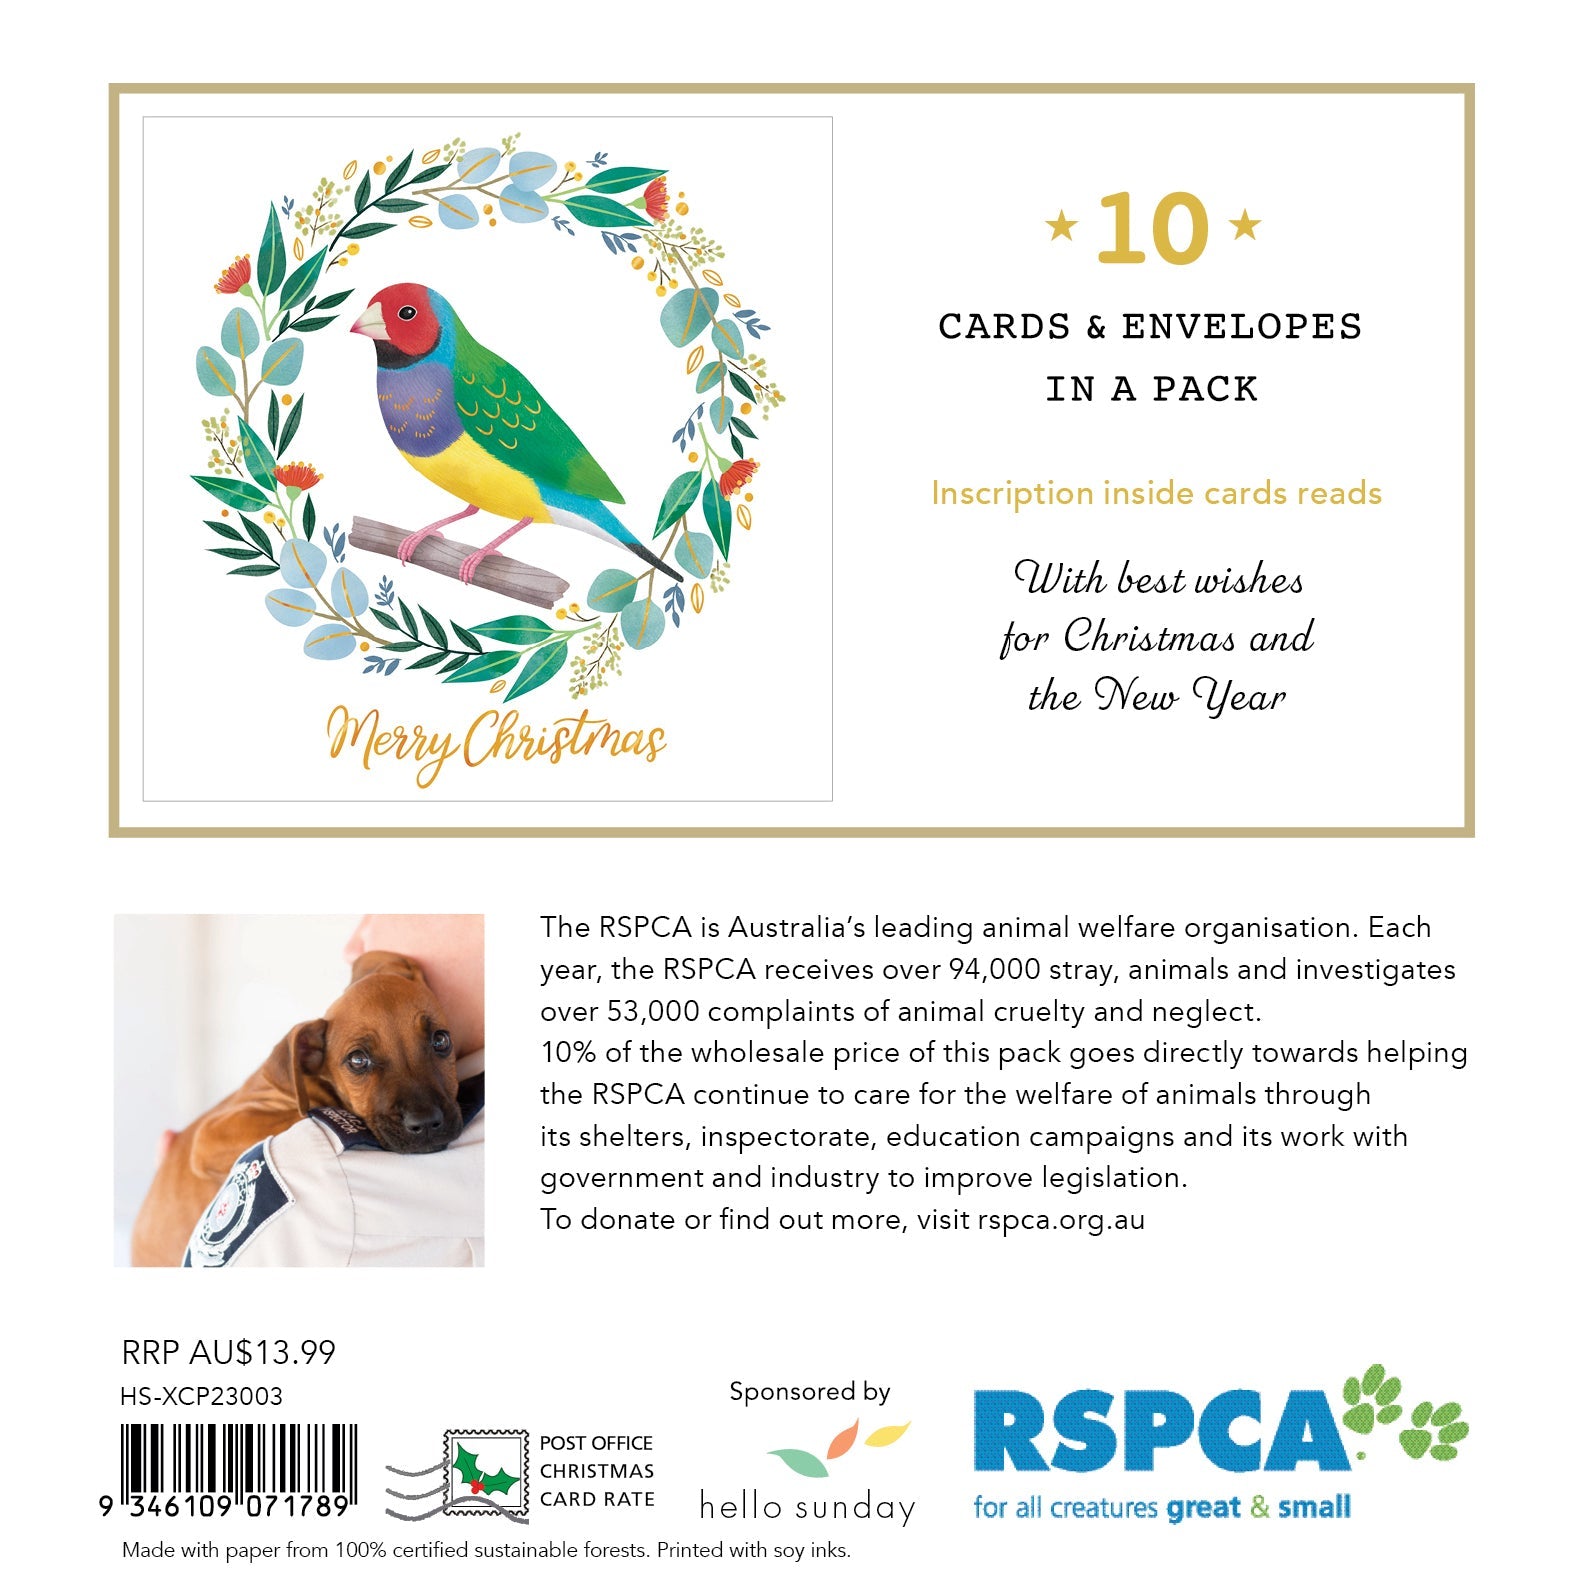 RSPCA Gouldian Finch Wreath - 10 Charity Christmas Cards Pack